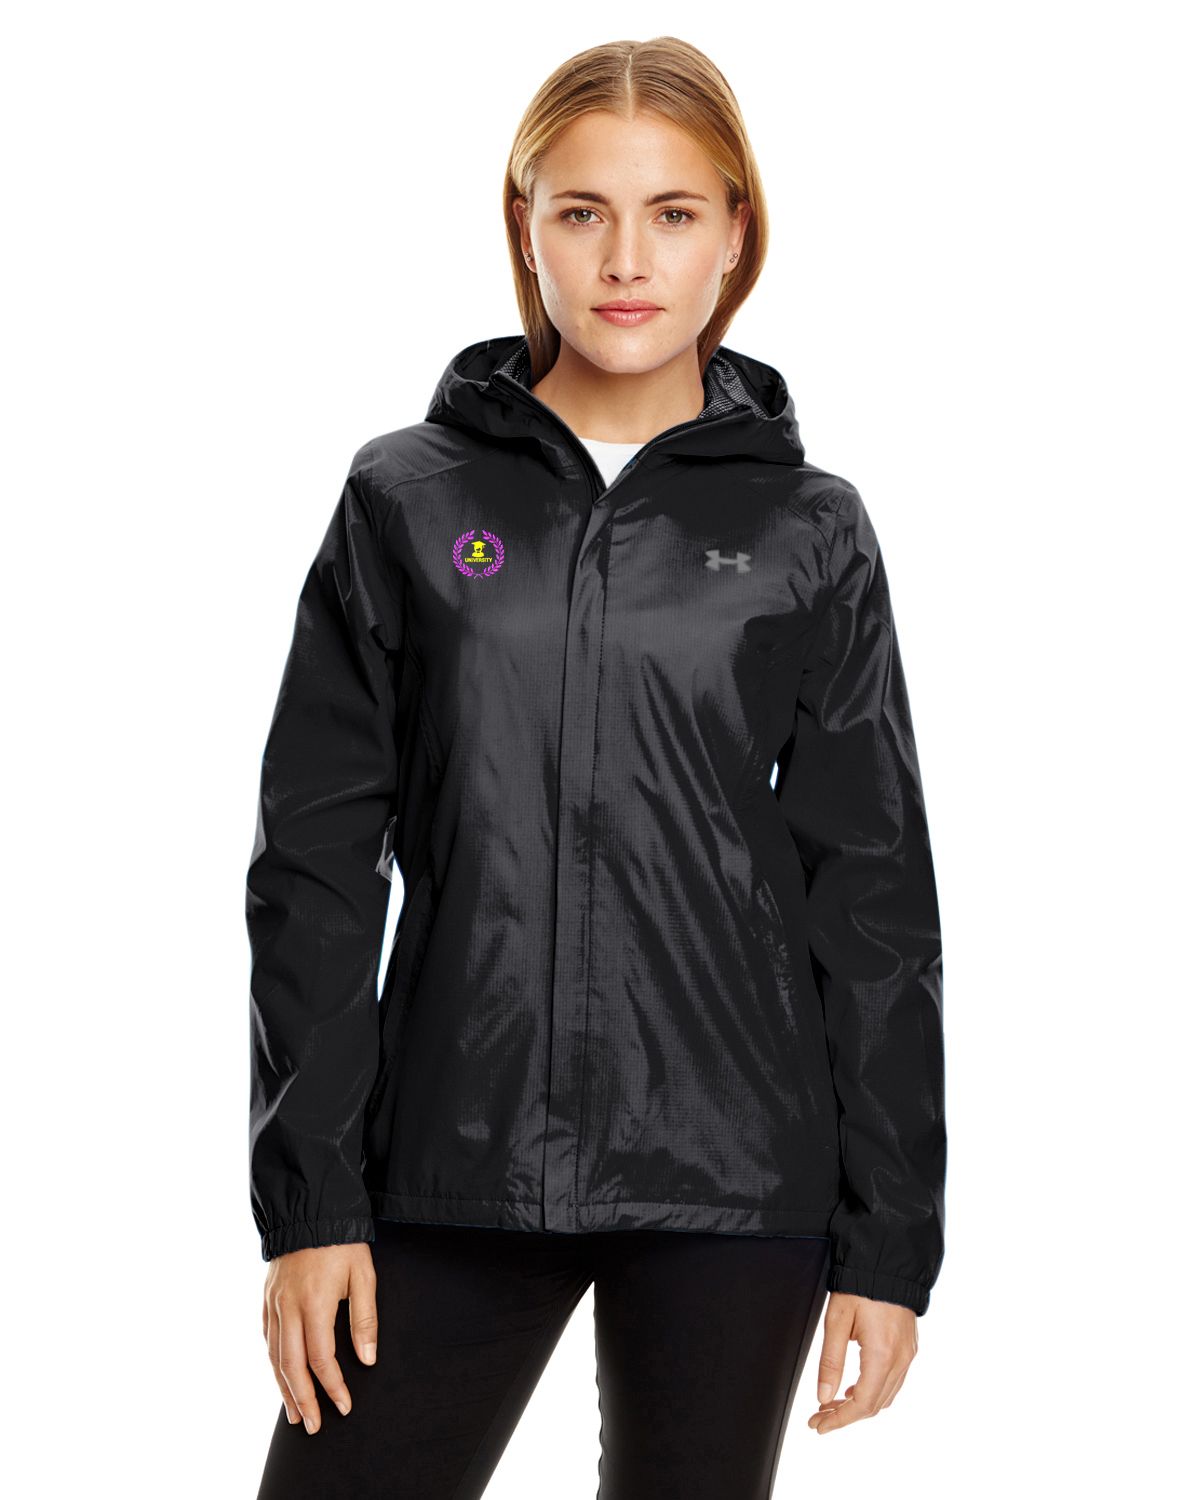 under armour water resistant jacket